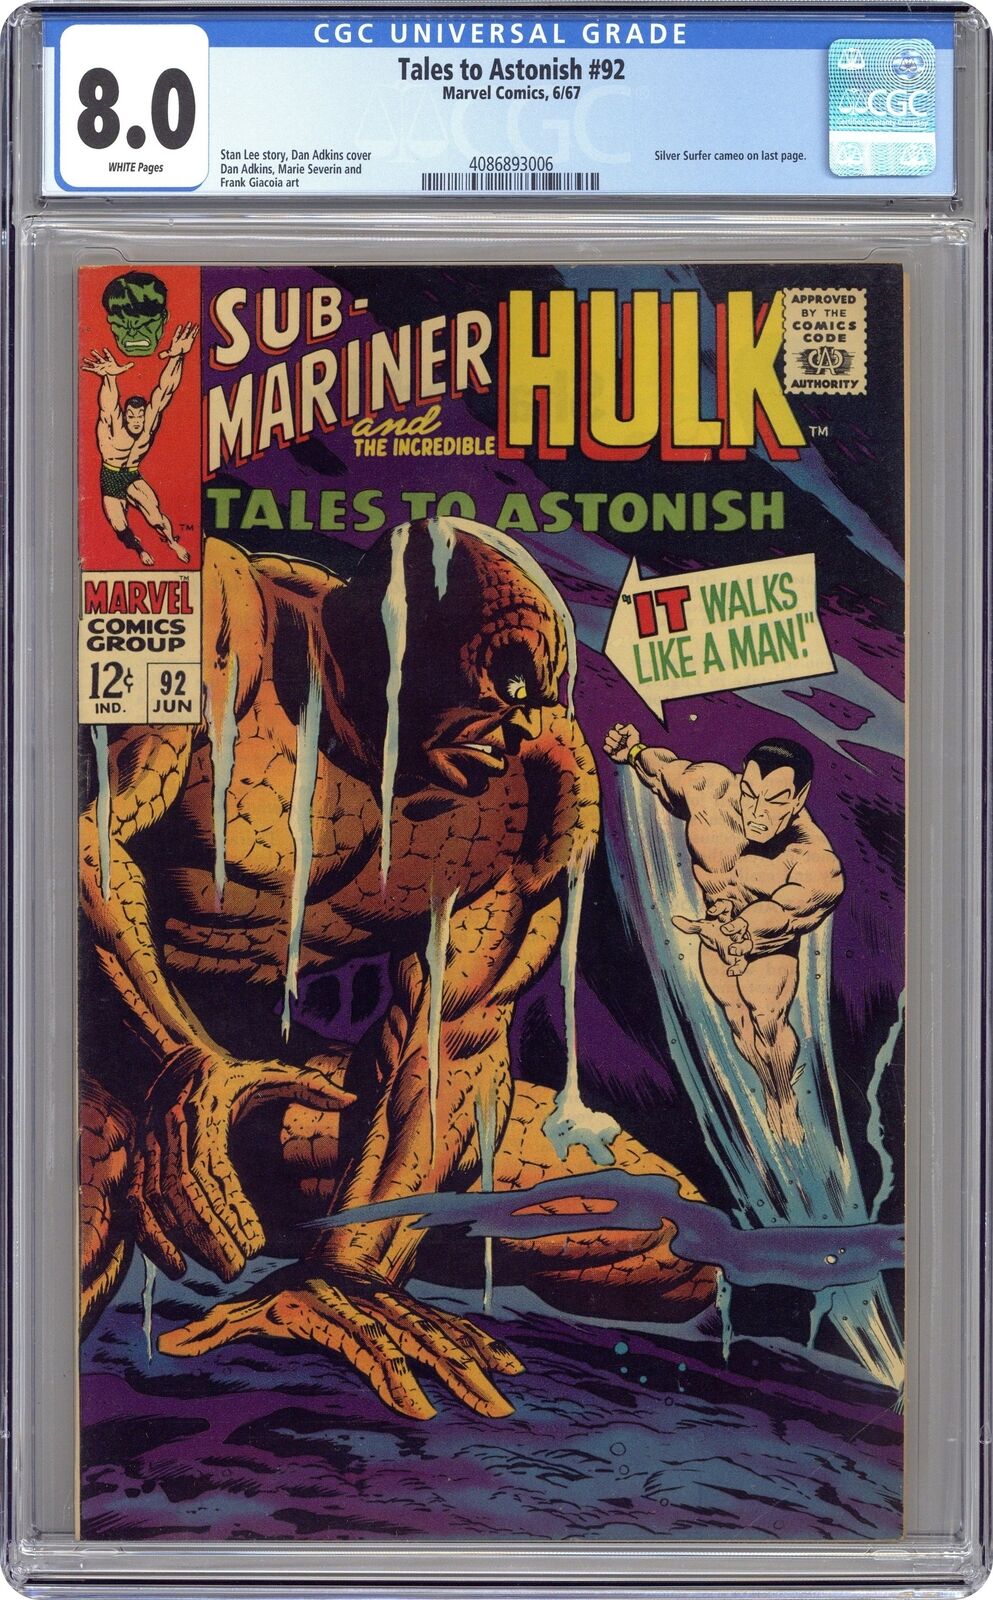 Tales to Astonish #92 CGC 8.0 1967 4086893006 1st Silver Surfer outside of FF